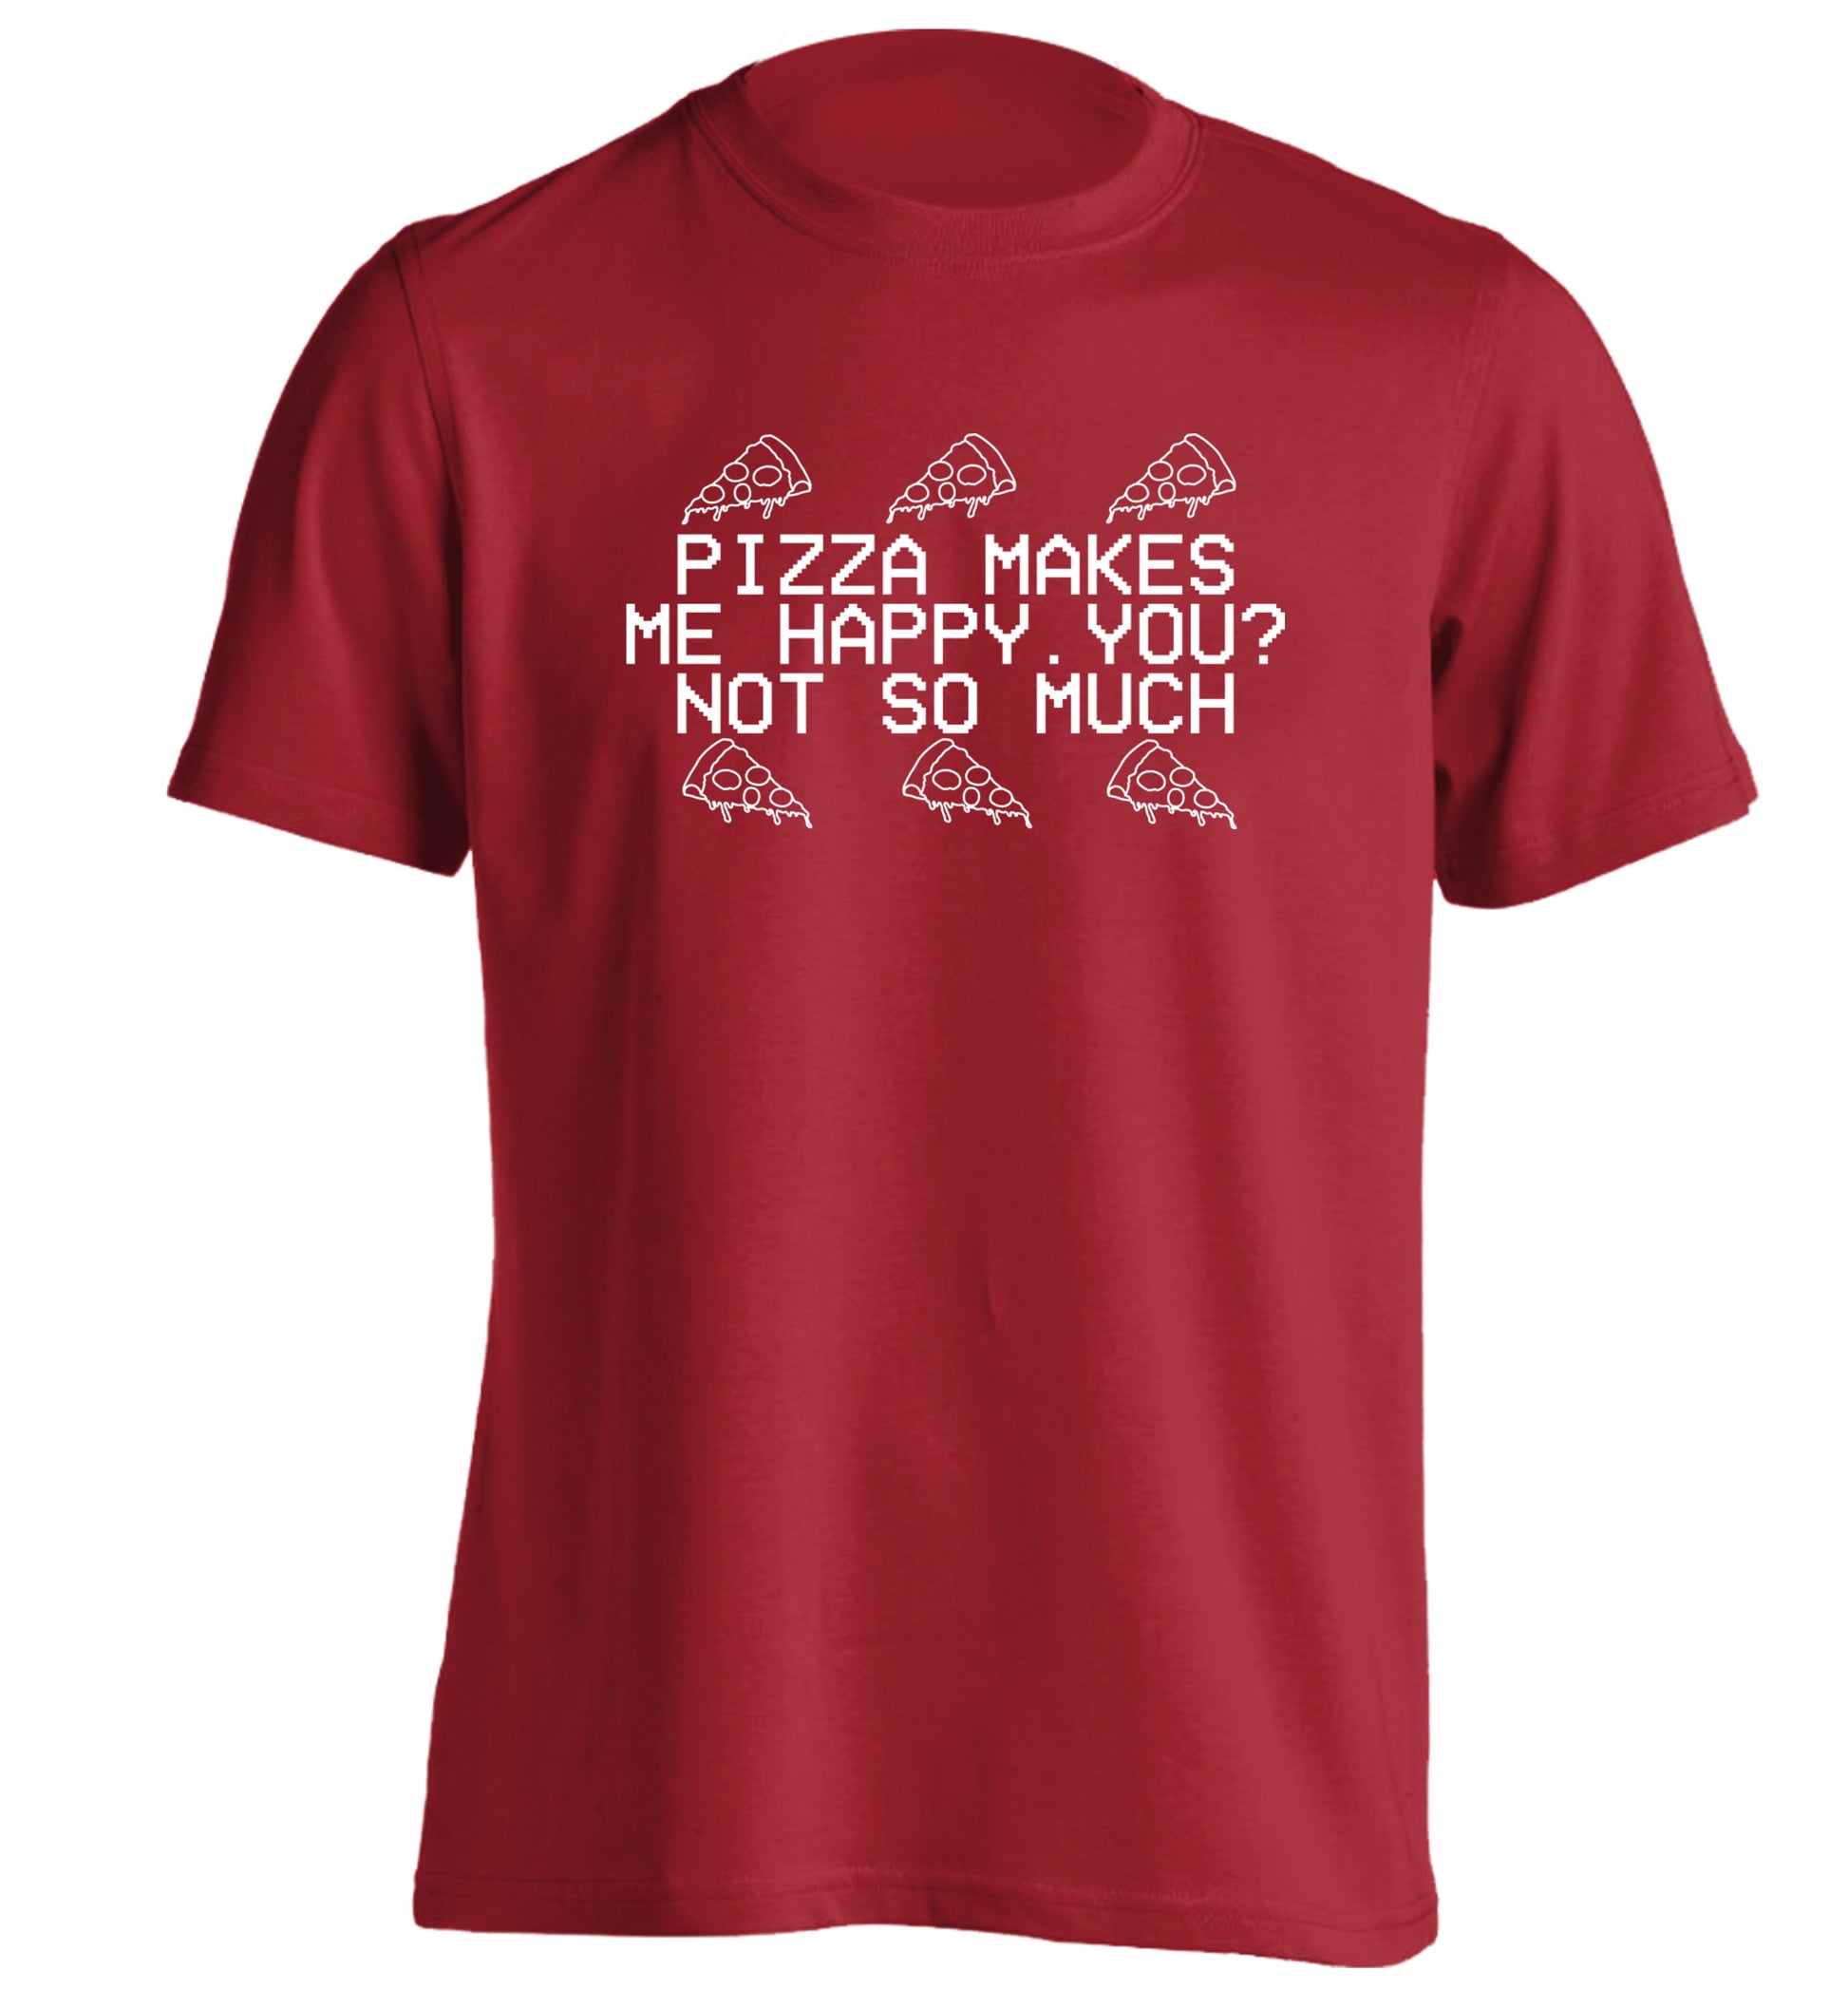 Pizza makes me happy, You? Not so much adults unisex red Tshirt 2XL